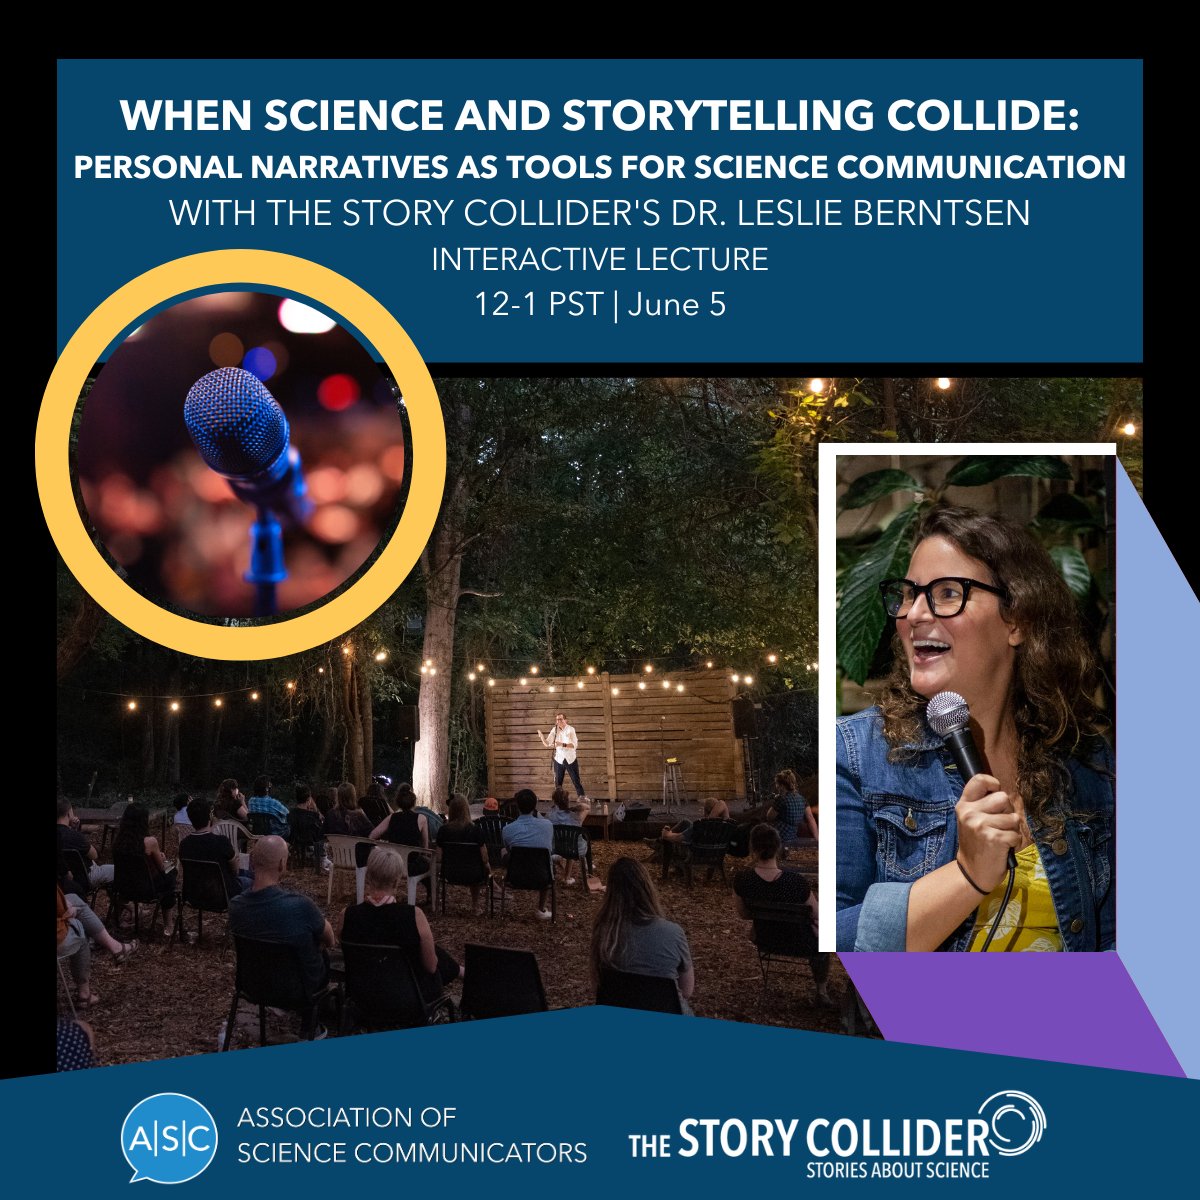 Unleash the power of storytelling in scicomm! Join Dr. Leslie Berntsen from @storycollider for an interactive session on 'When Science and Storytelling Collide.' Master the art of crafting compelling narratives and seamlessly integrating science! 💡 #ScienceStorytelling #SciComm